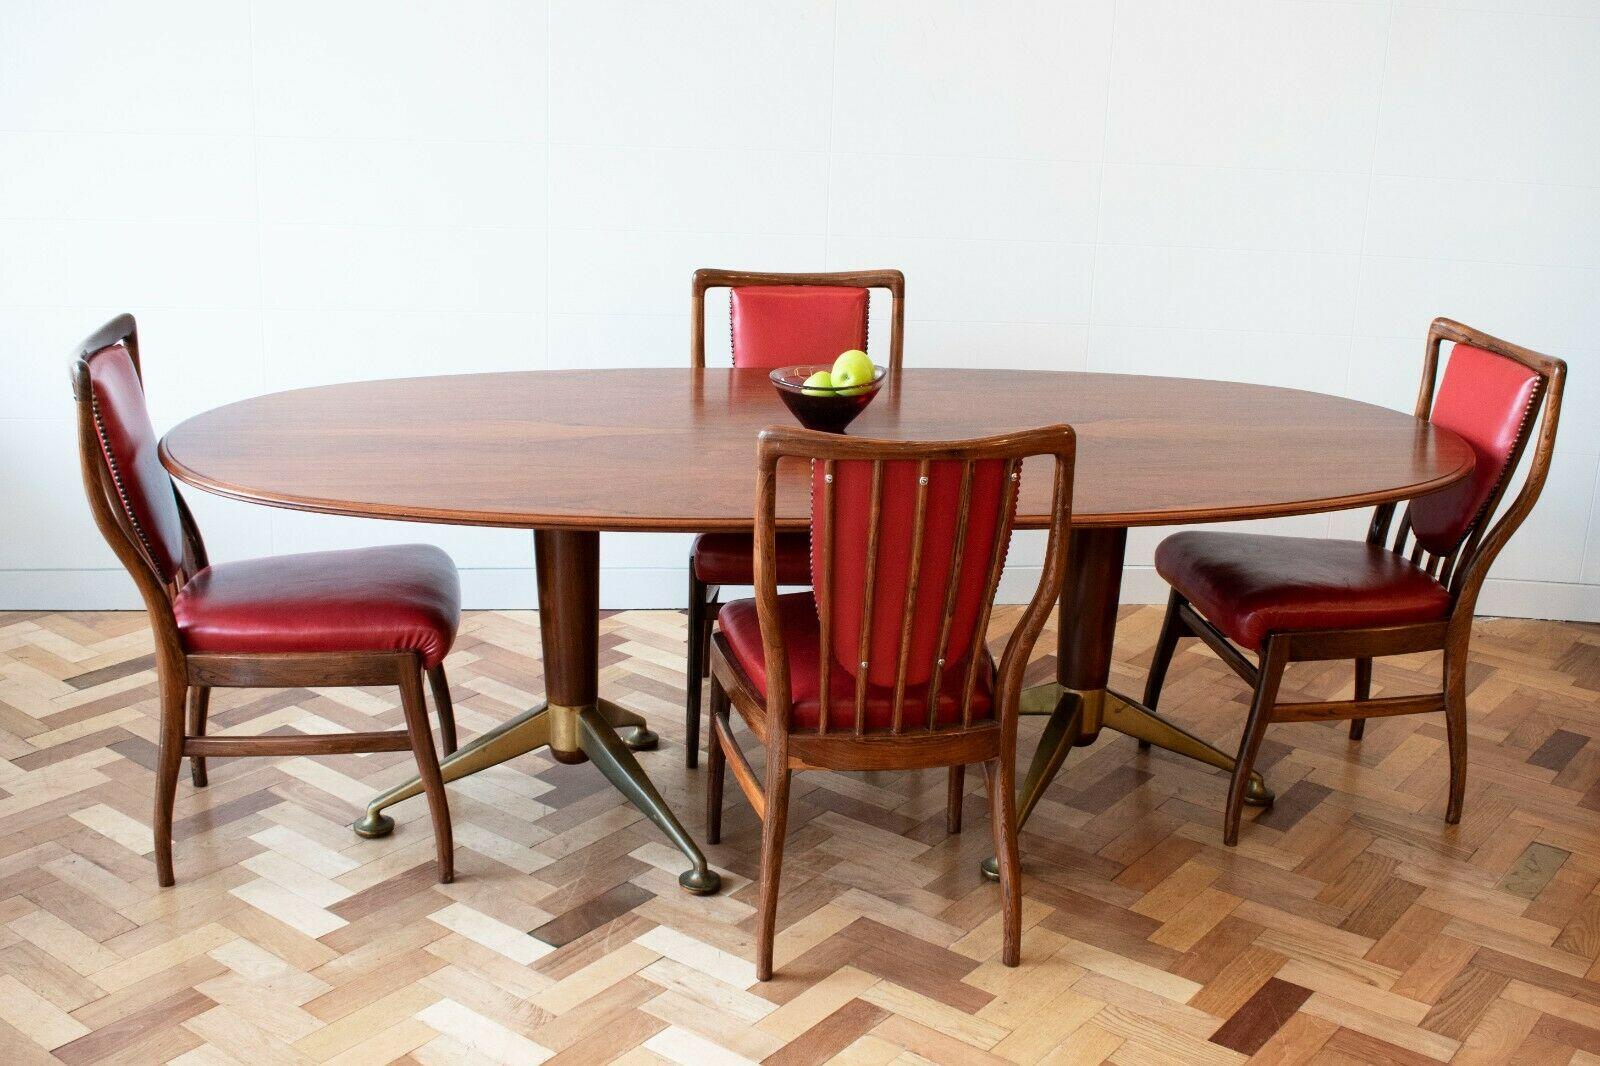 20th Century 1950s Rosewood Dining Table with Brass Feet by Andrew J Milne for Heals London